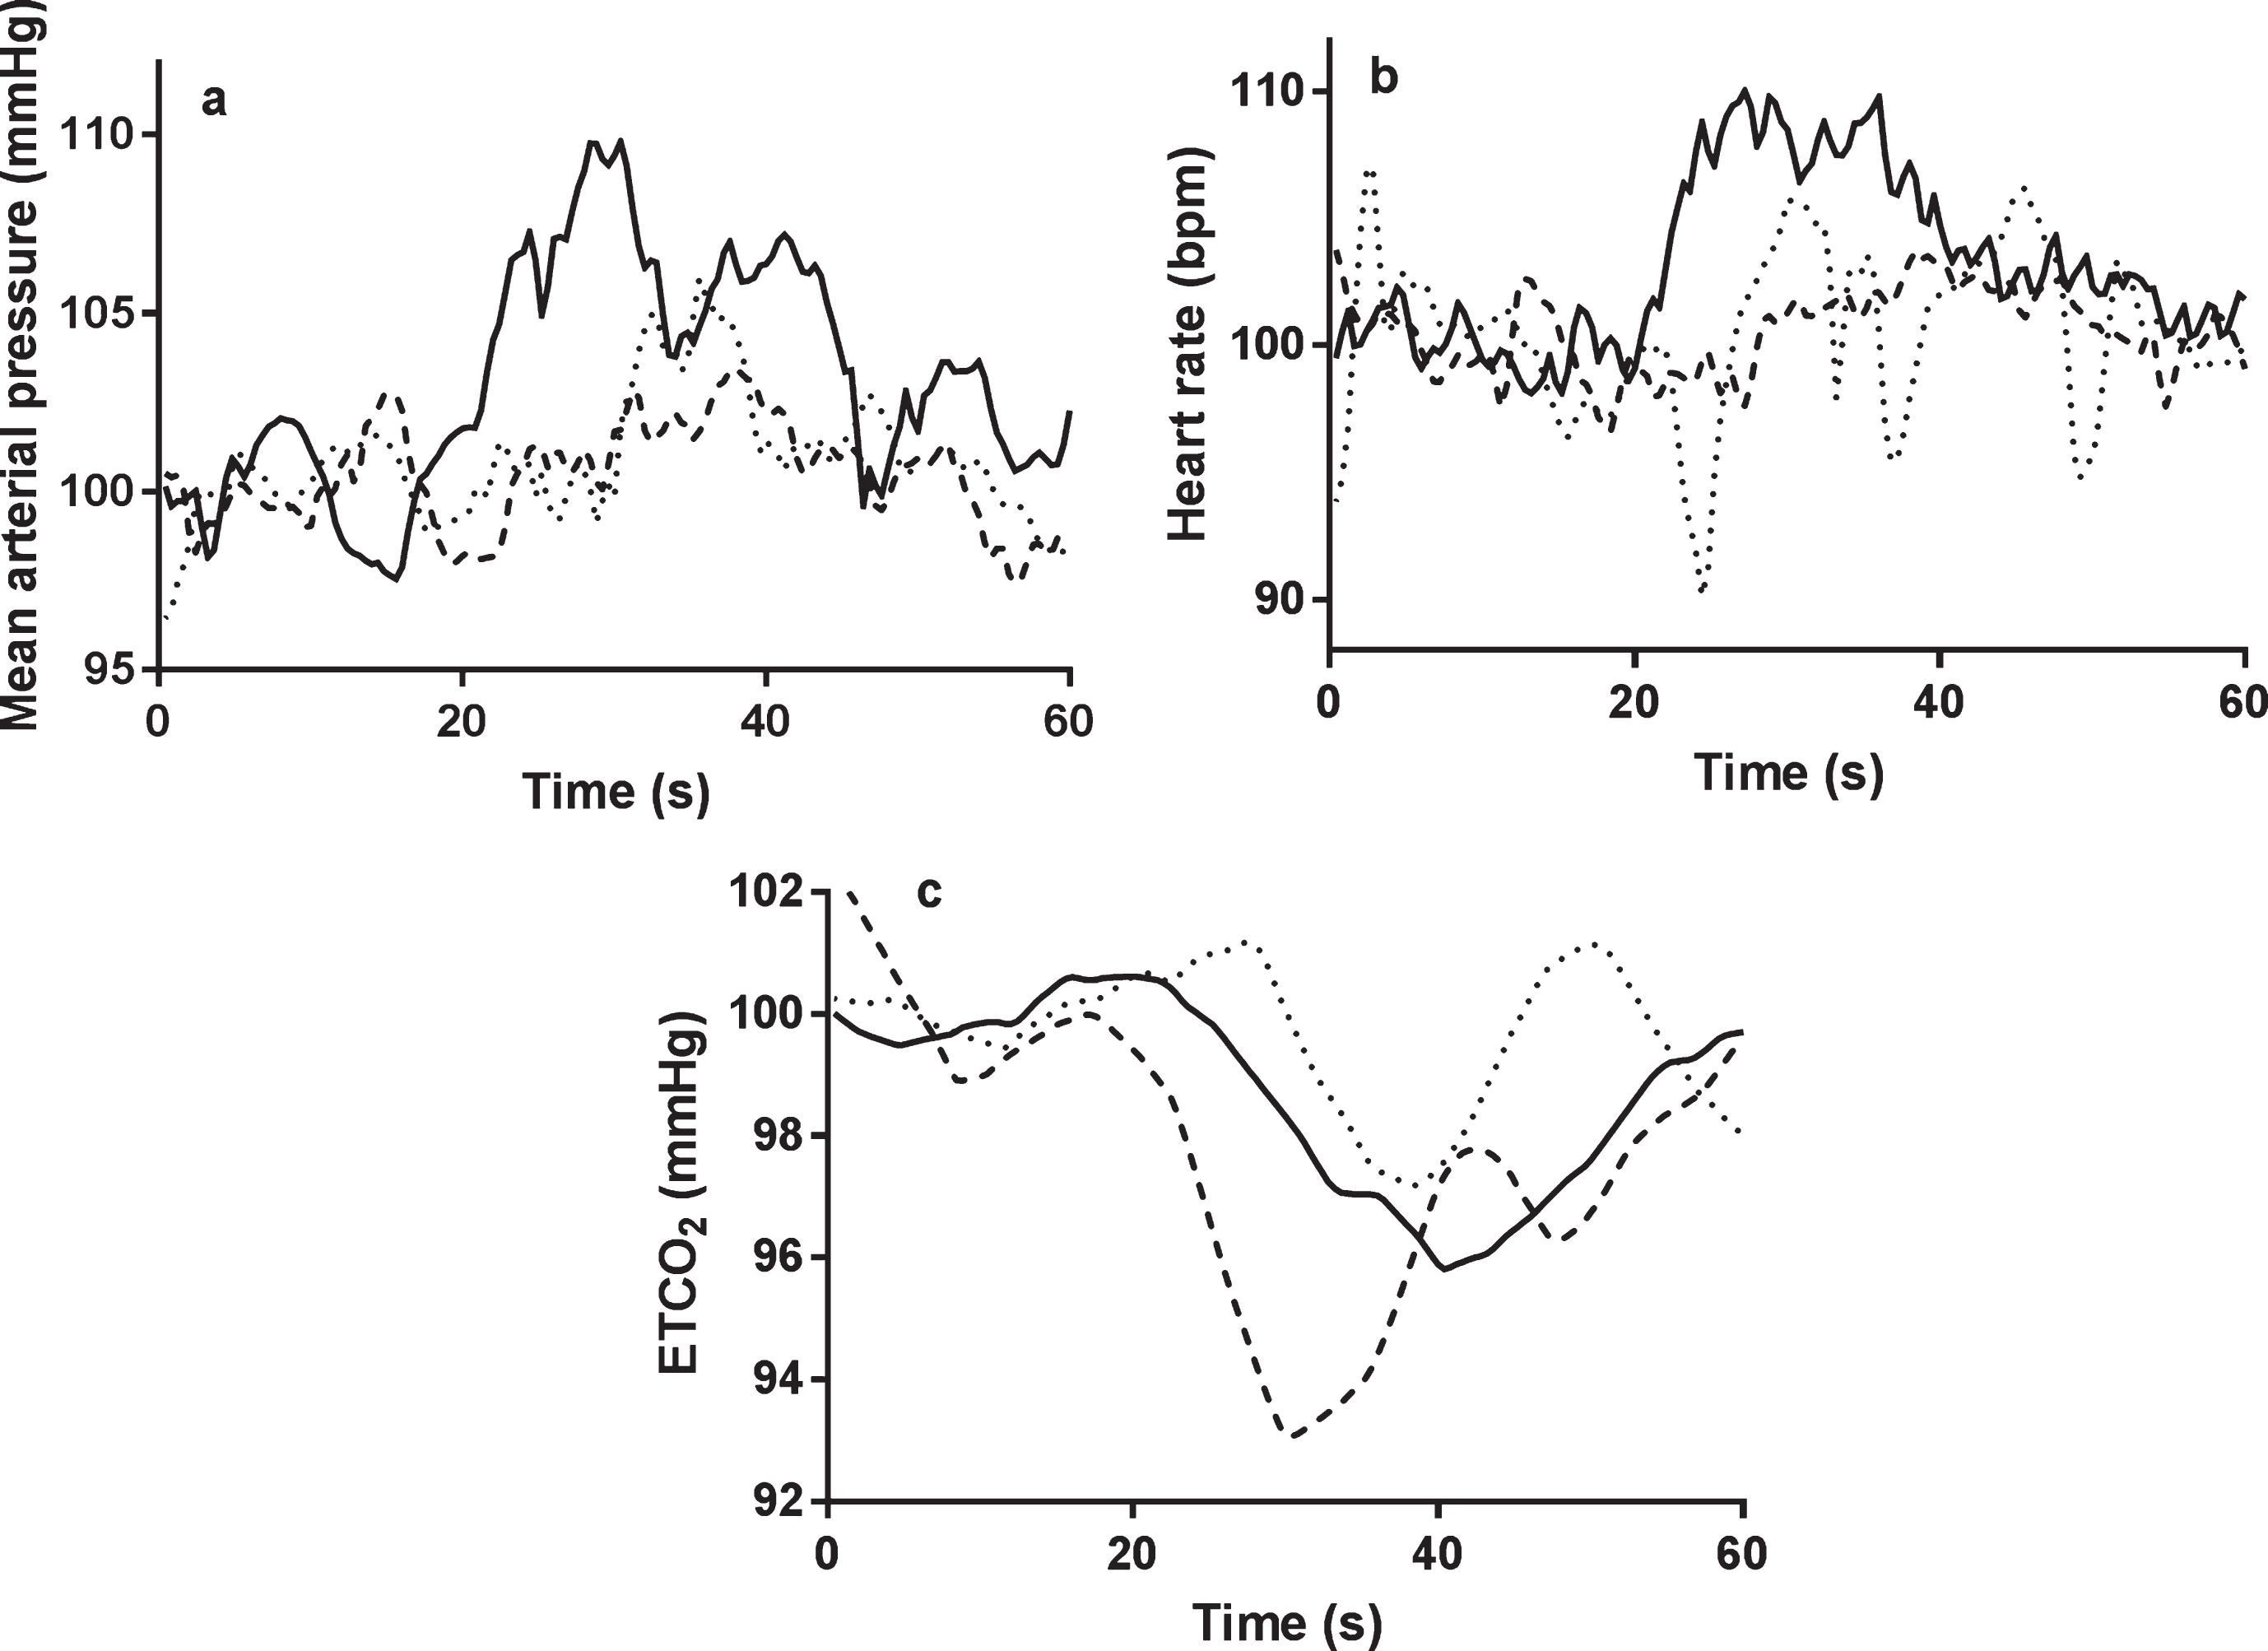 The temporal changes in MAP (a), heart rate (b), and ETCO2 (c), to the language task. All signals were normalized by baseline values. Continuous line = healthy control, dotted line = mild cognitive impairment, interrupted line = Alzheimer’s disease. a) non-dominant hemisphere; b) dominant hemisphere. Task initiation occurred at 20 s.